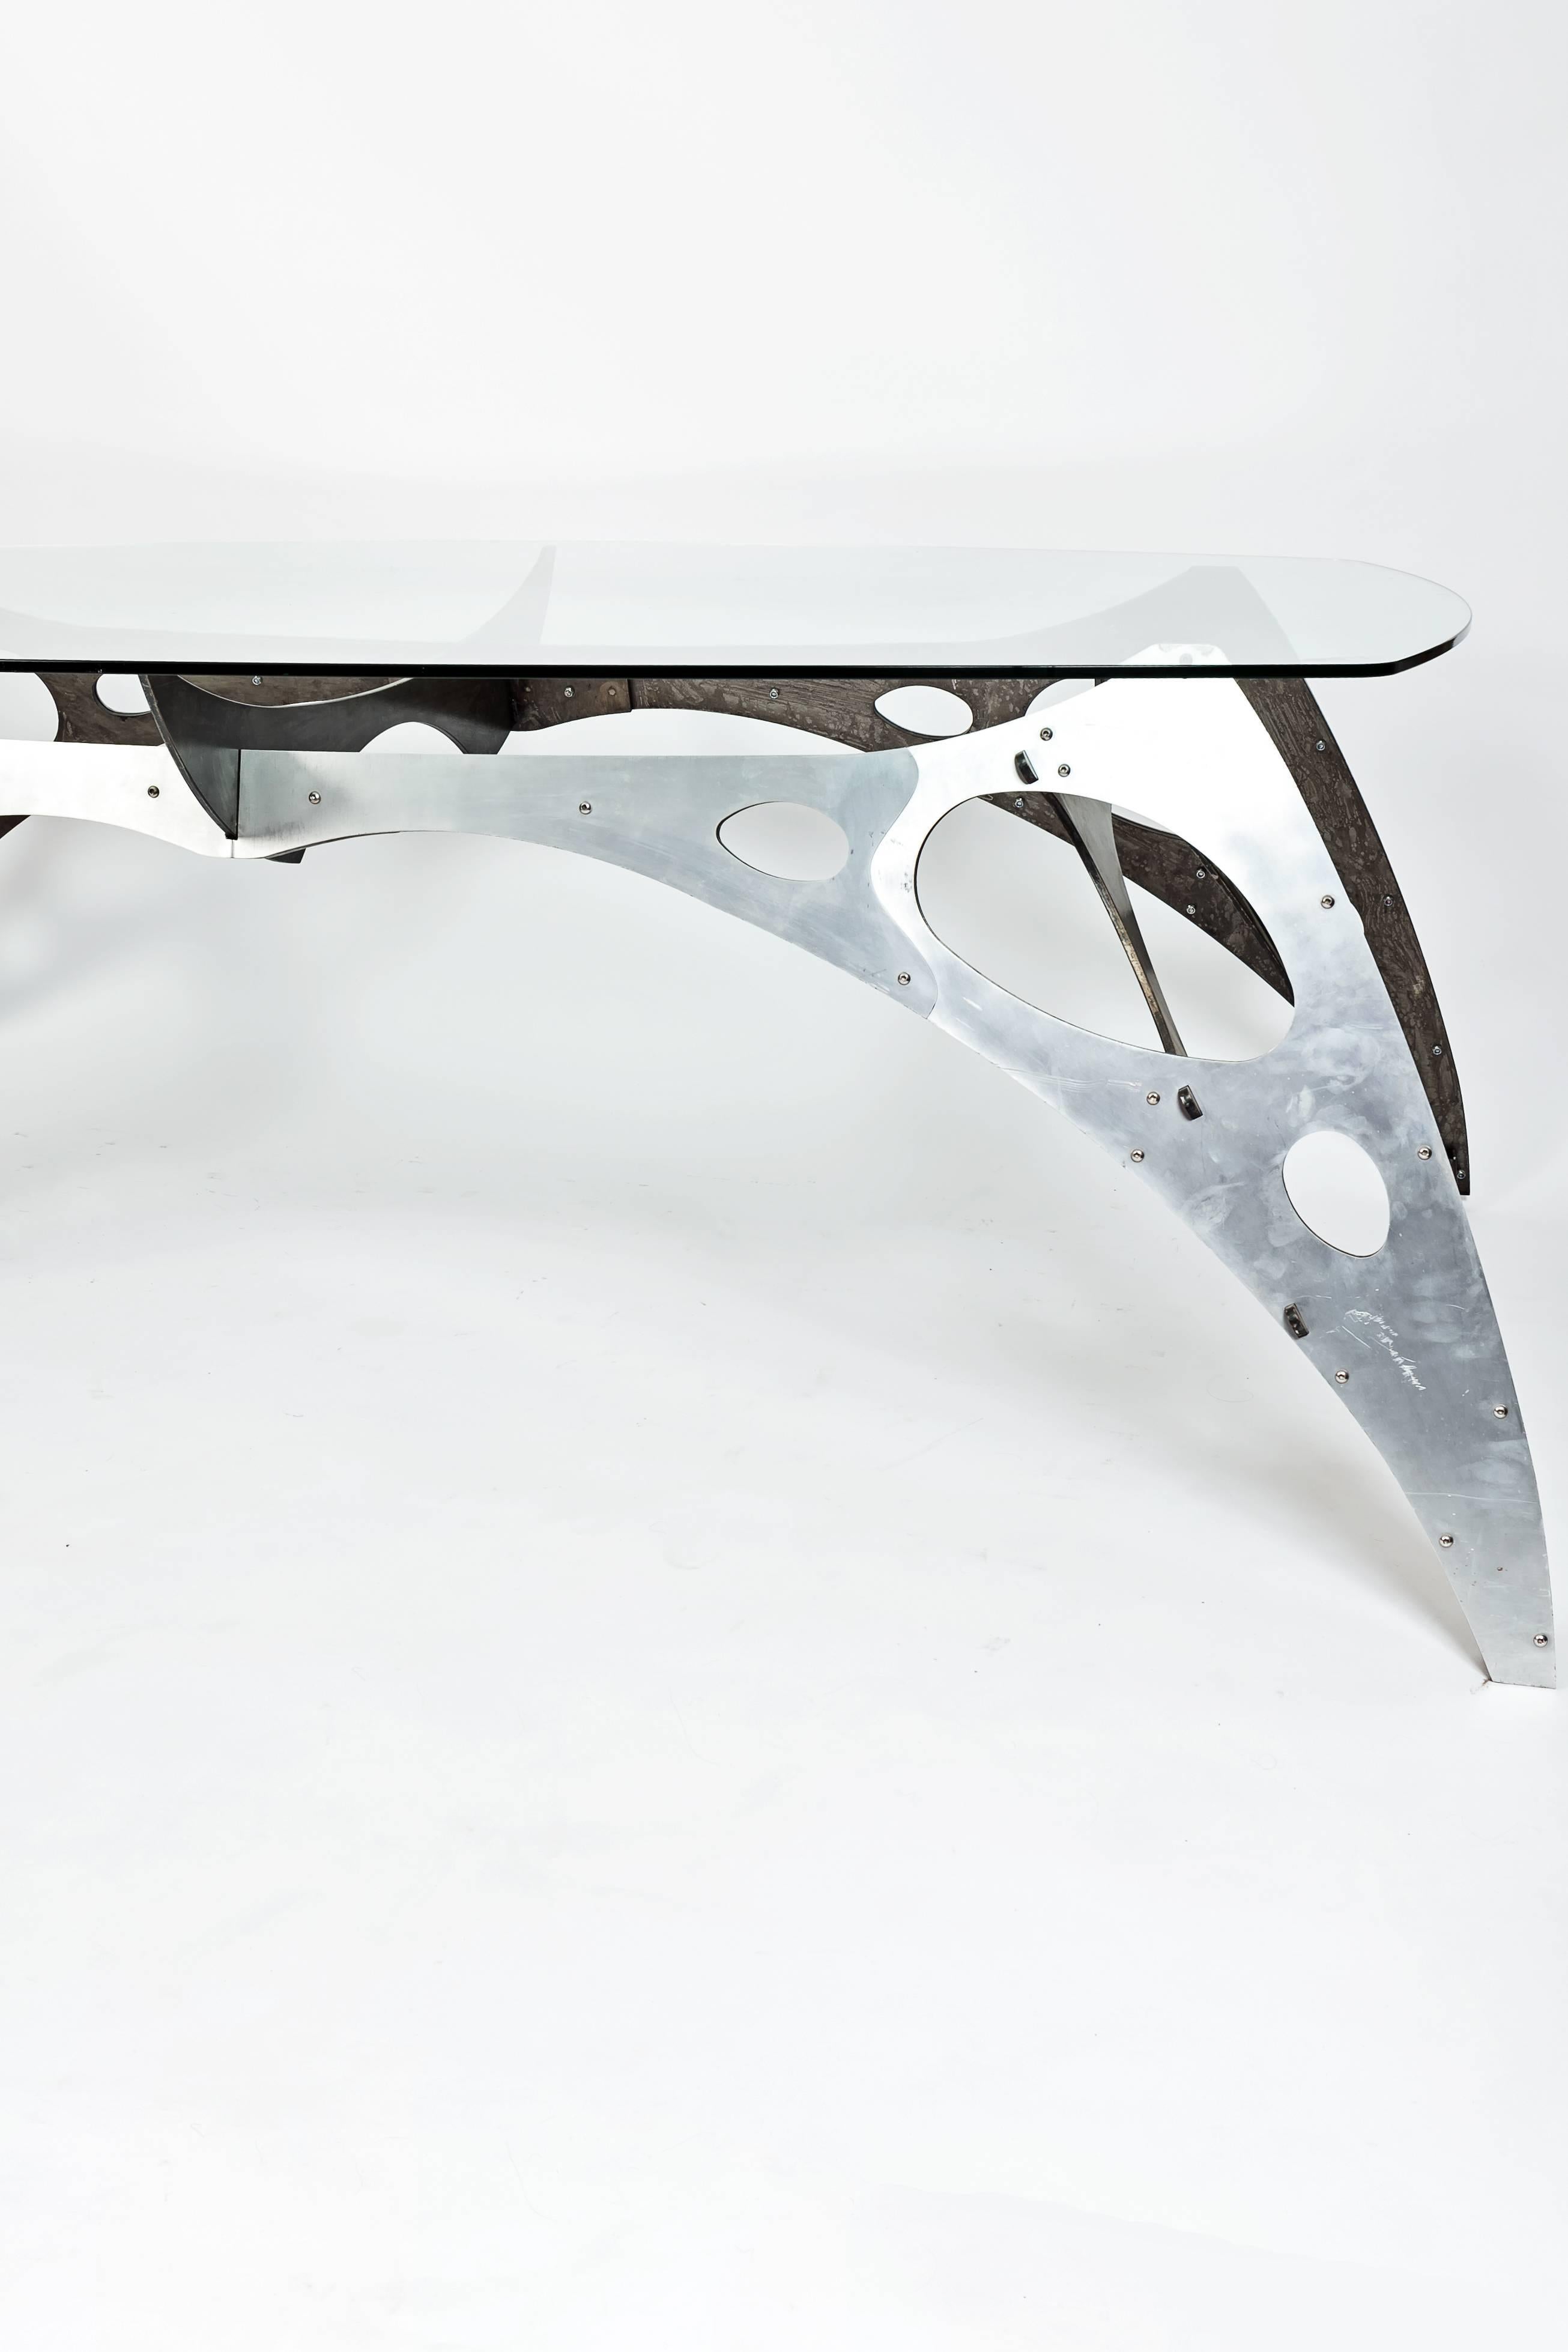 Aluminium dining table with aerodynamic design. The top glass has an oval form.